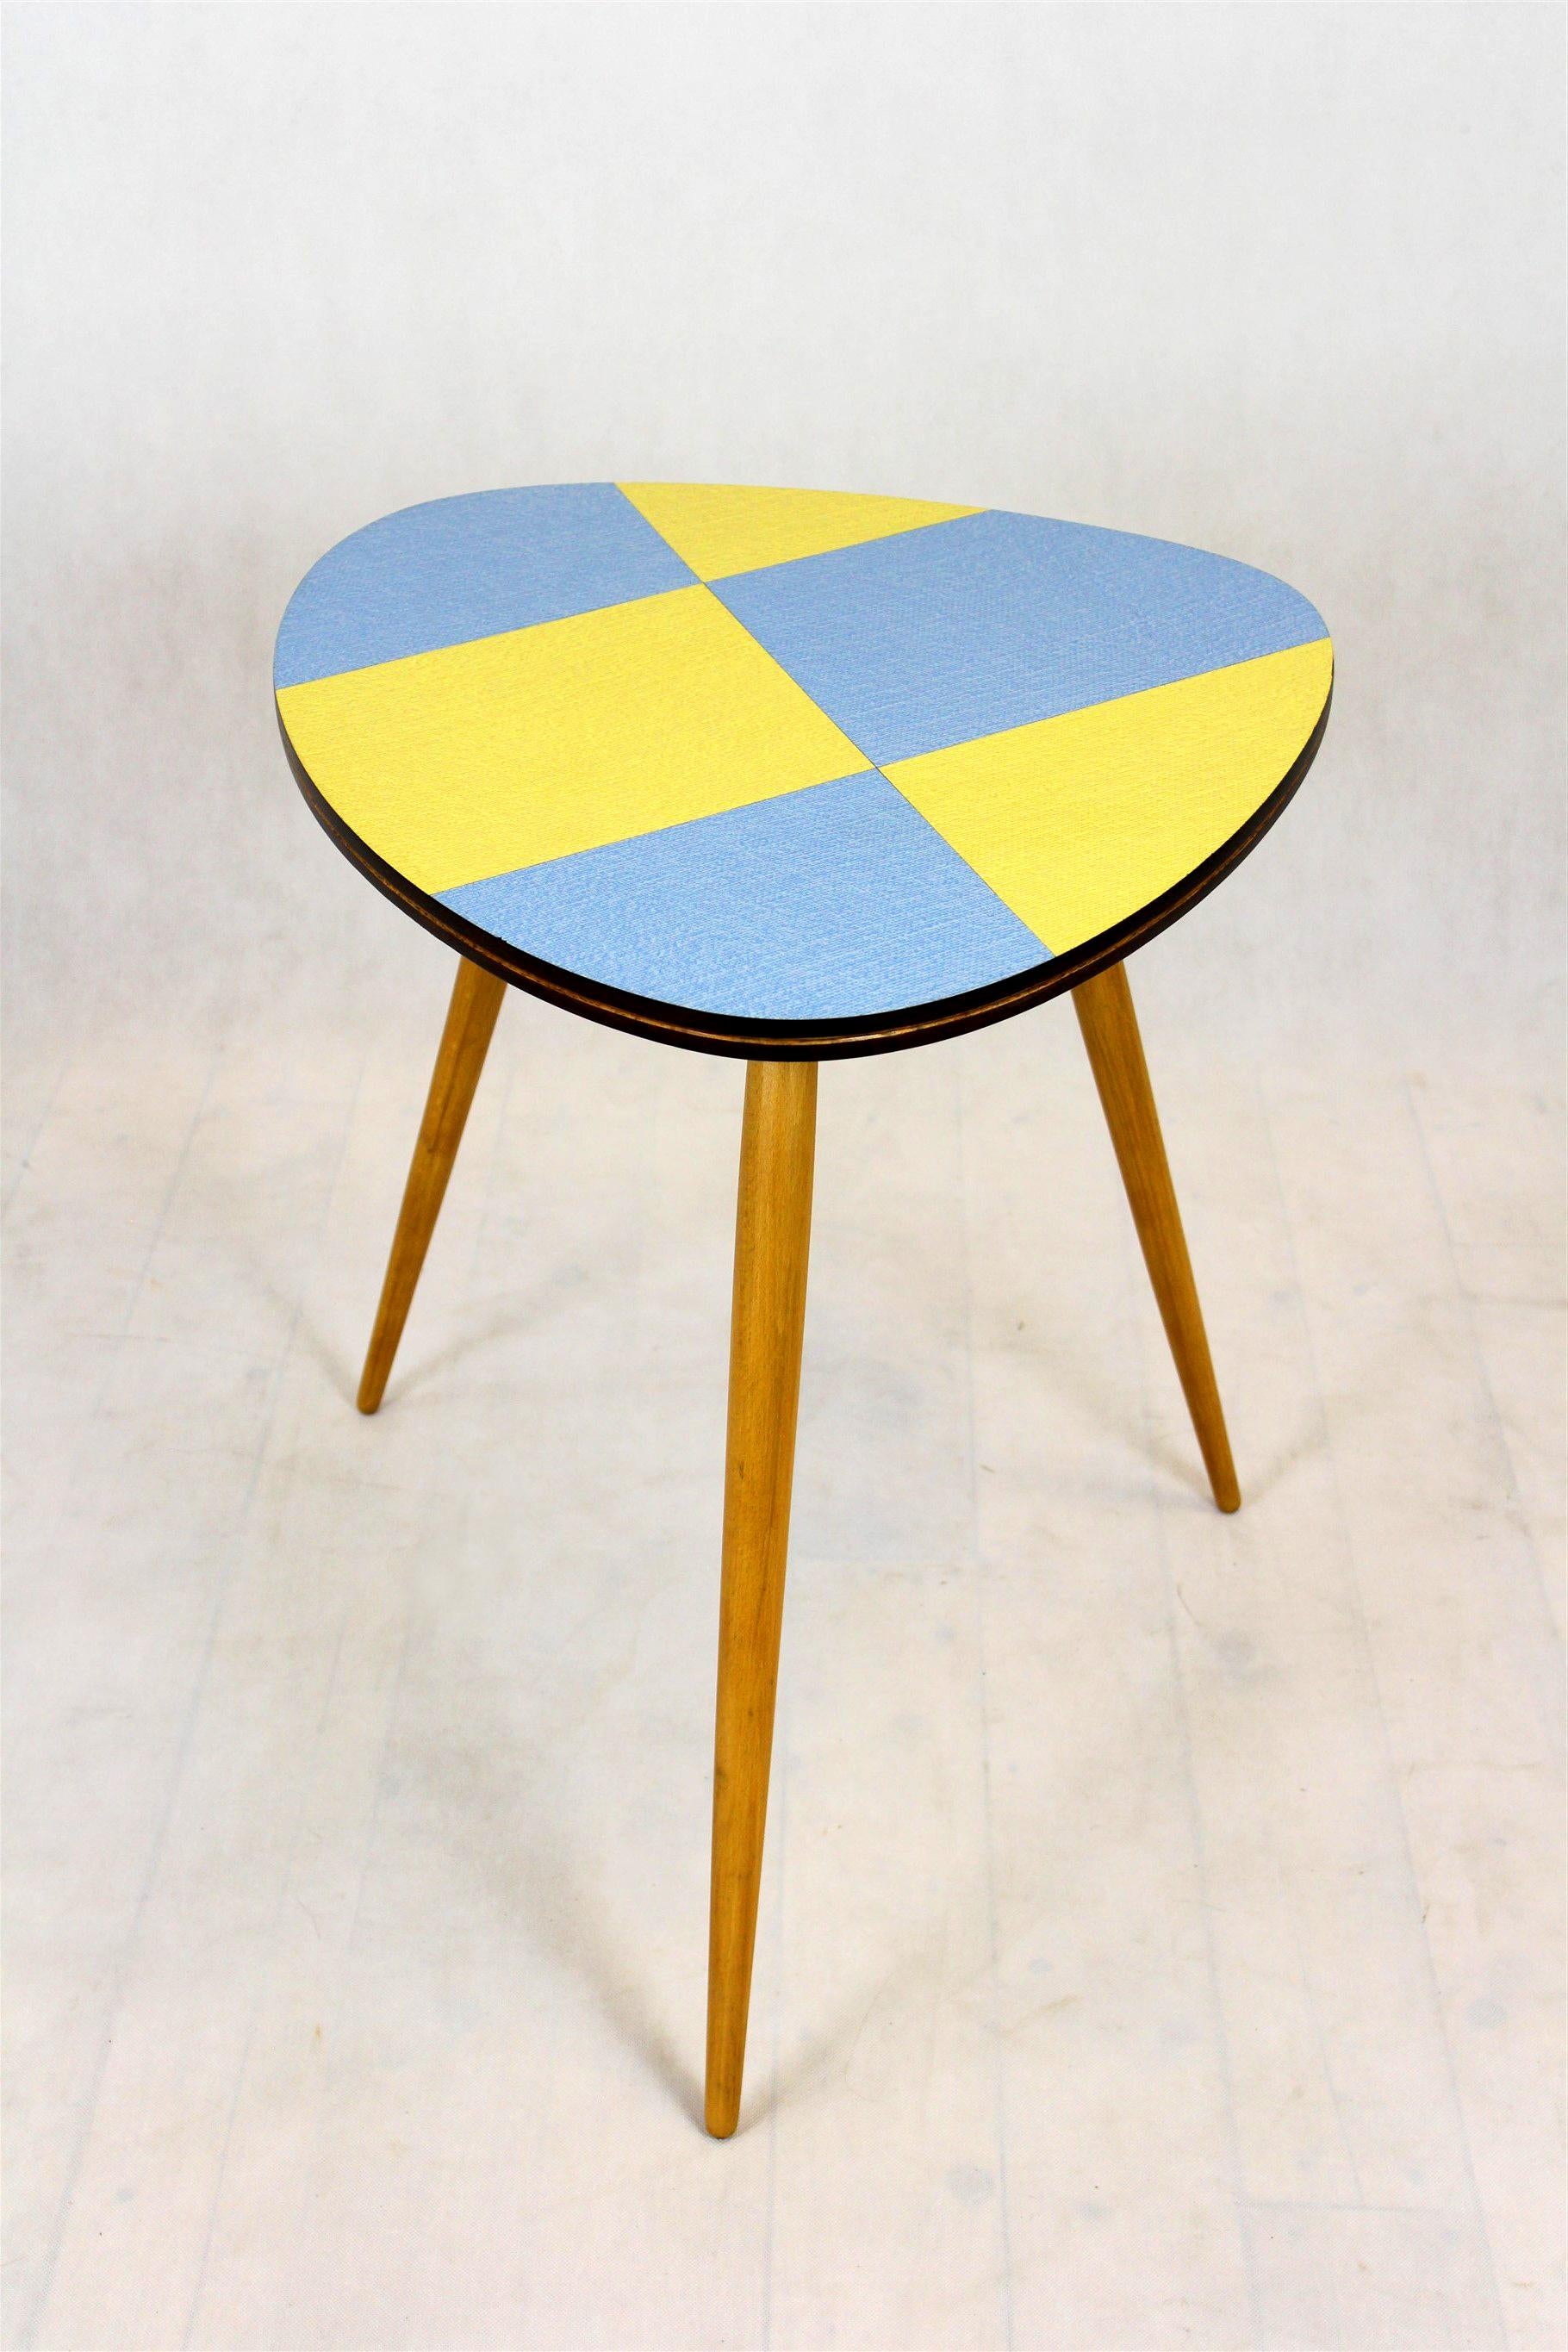 This coffee table was produced in the 1960s by Drevopodnik Brno in former Czechoslovakia. It features original, multicolored laminate top with a geometrical pattern.
It has been restored, lacquered in satin.
The table top is in its original, very